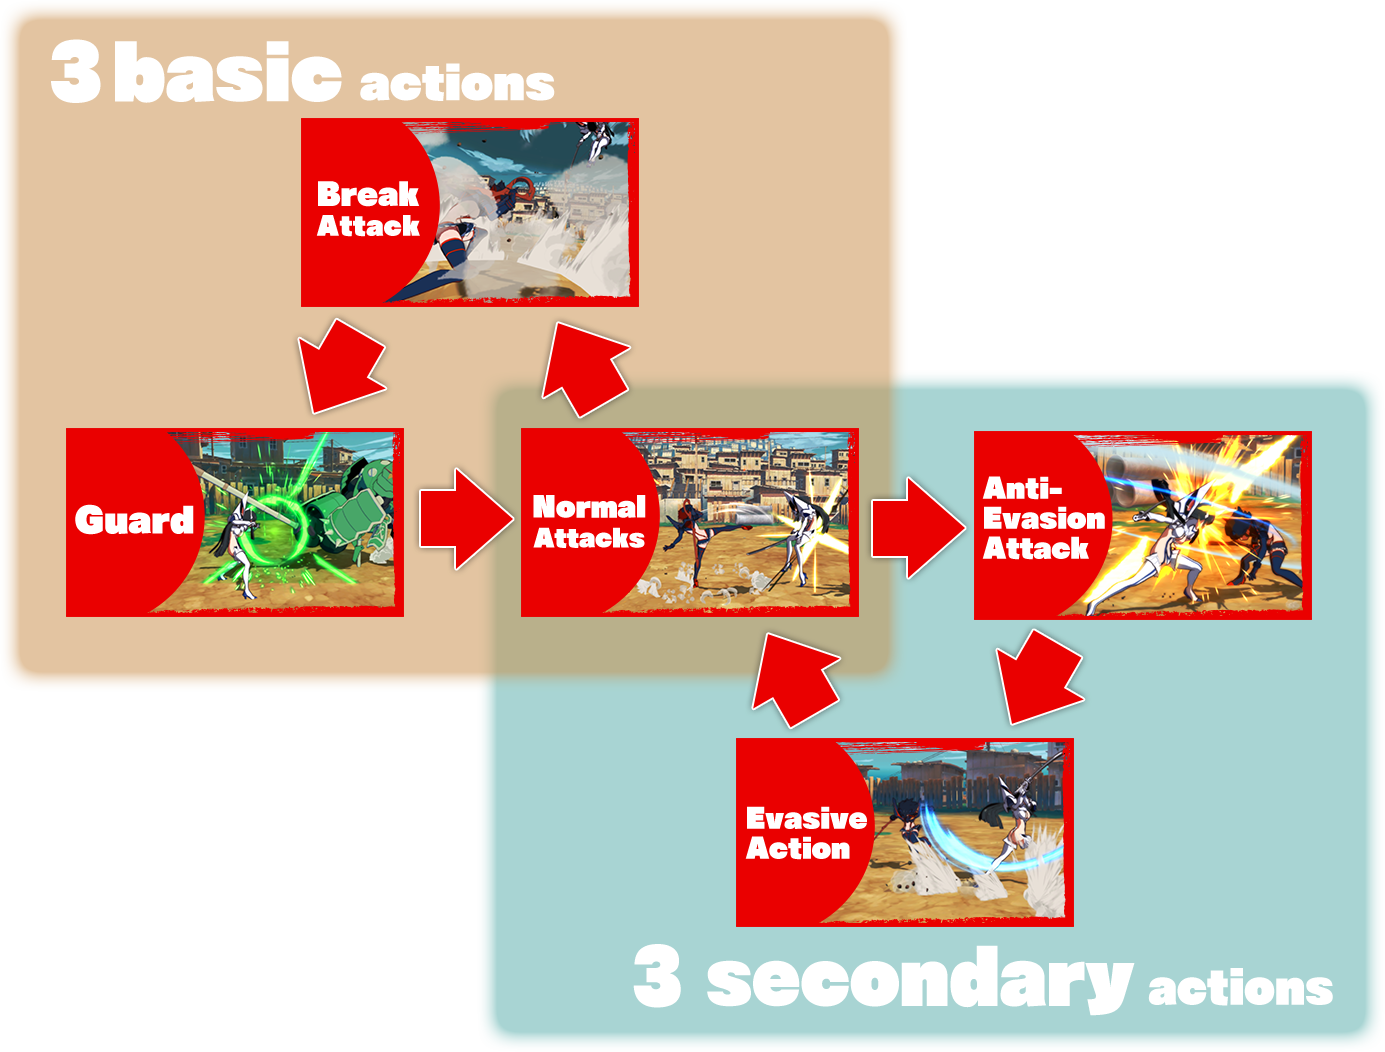 3 basic actions / 3 secondary actions